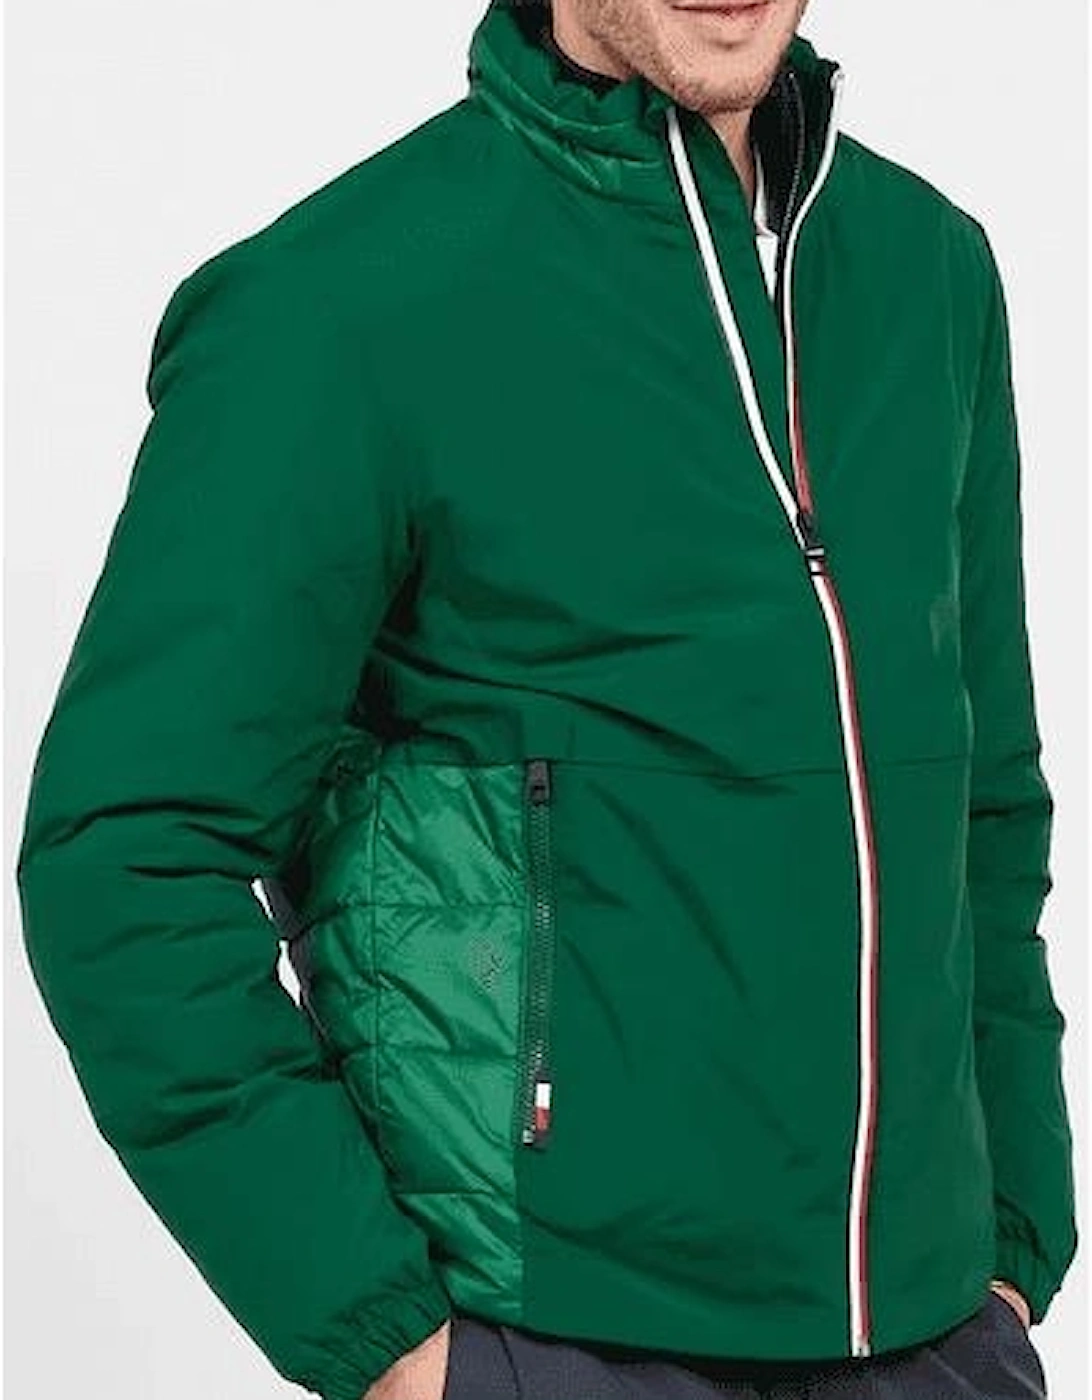 Nylon High Neck Quilted Green Parka Jacket